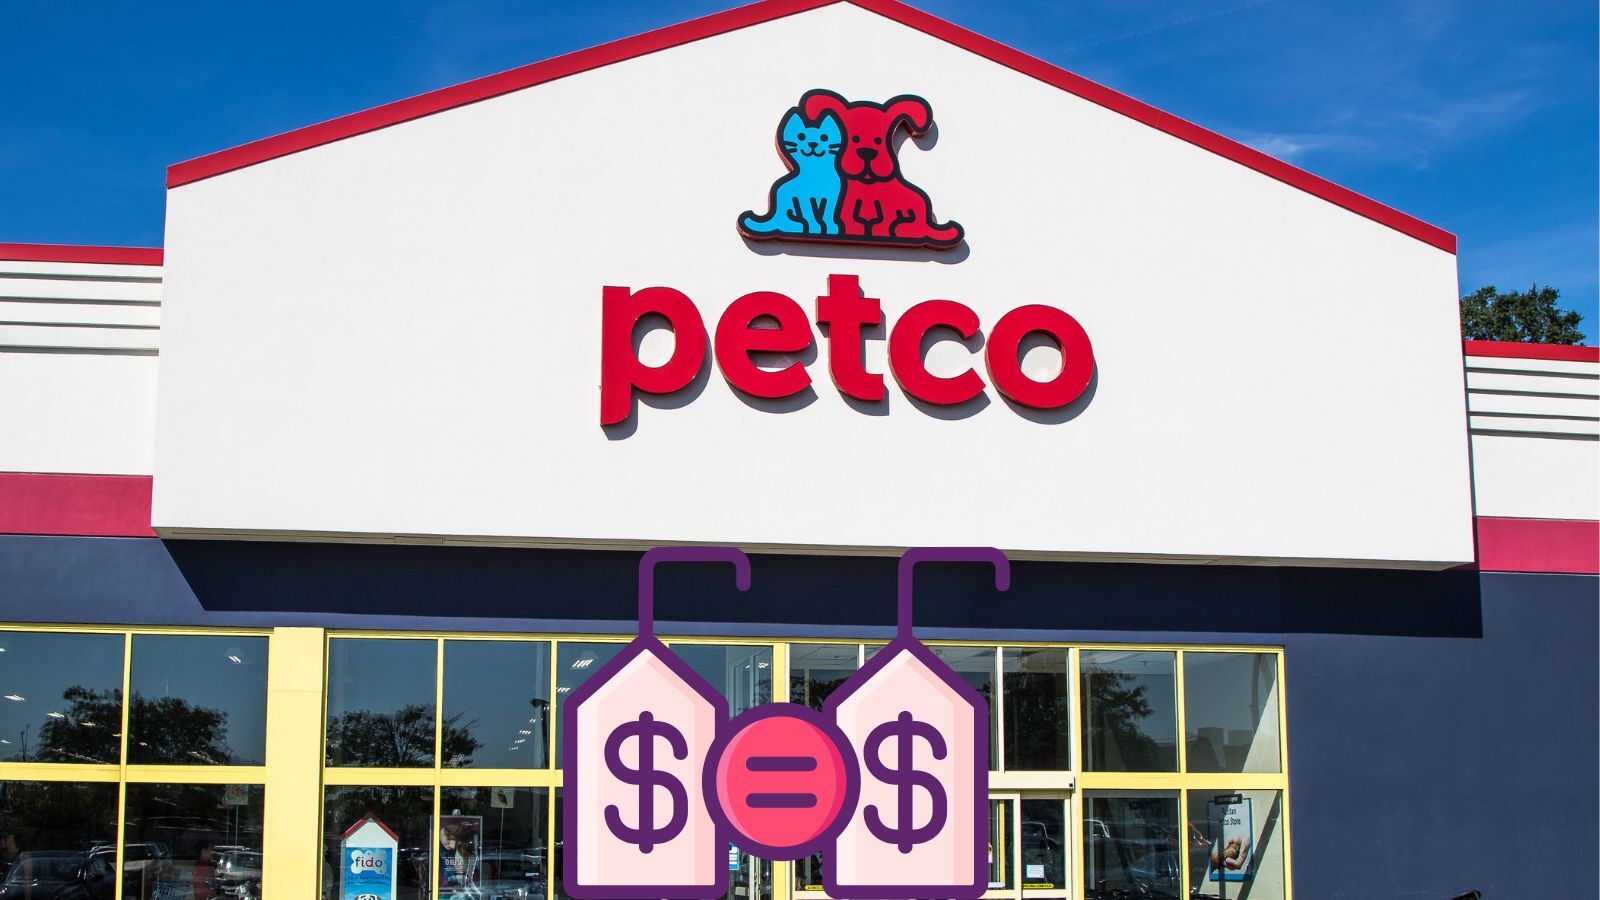 Does Petco Price Match? (All You Need to Know)